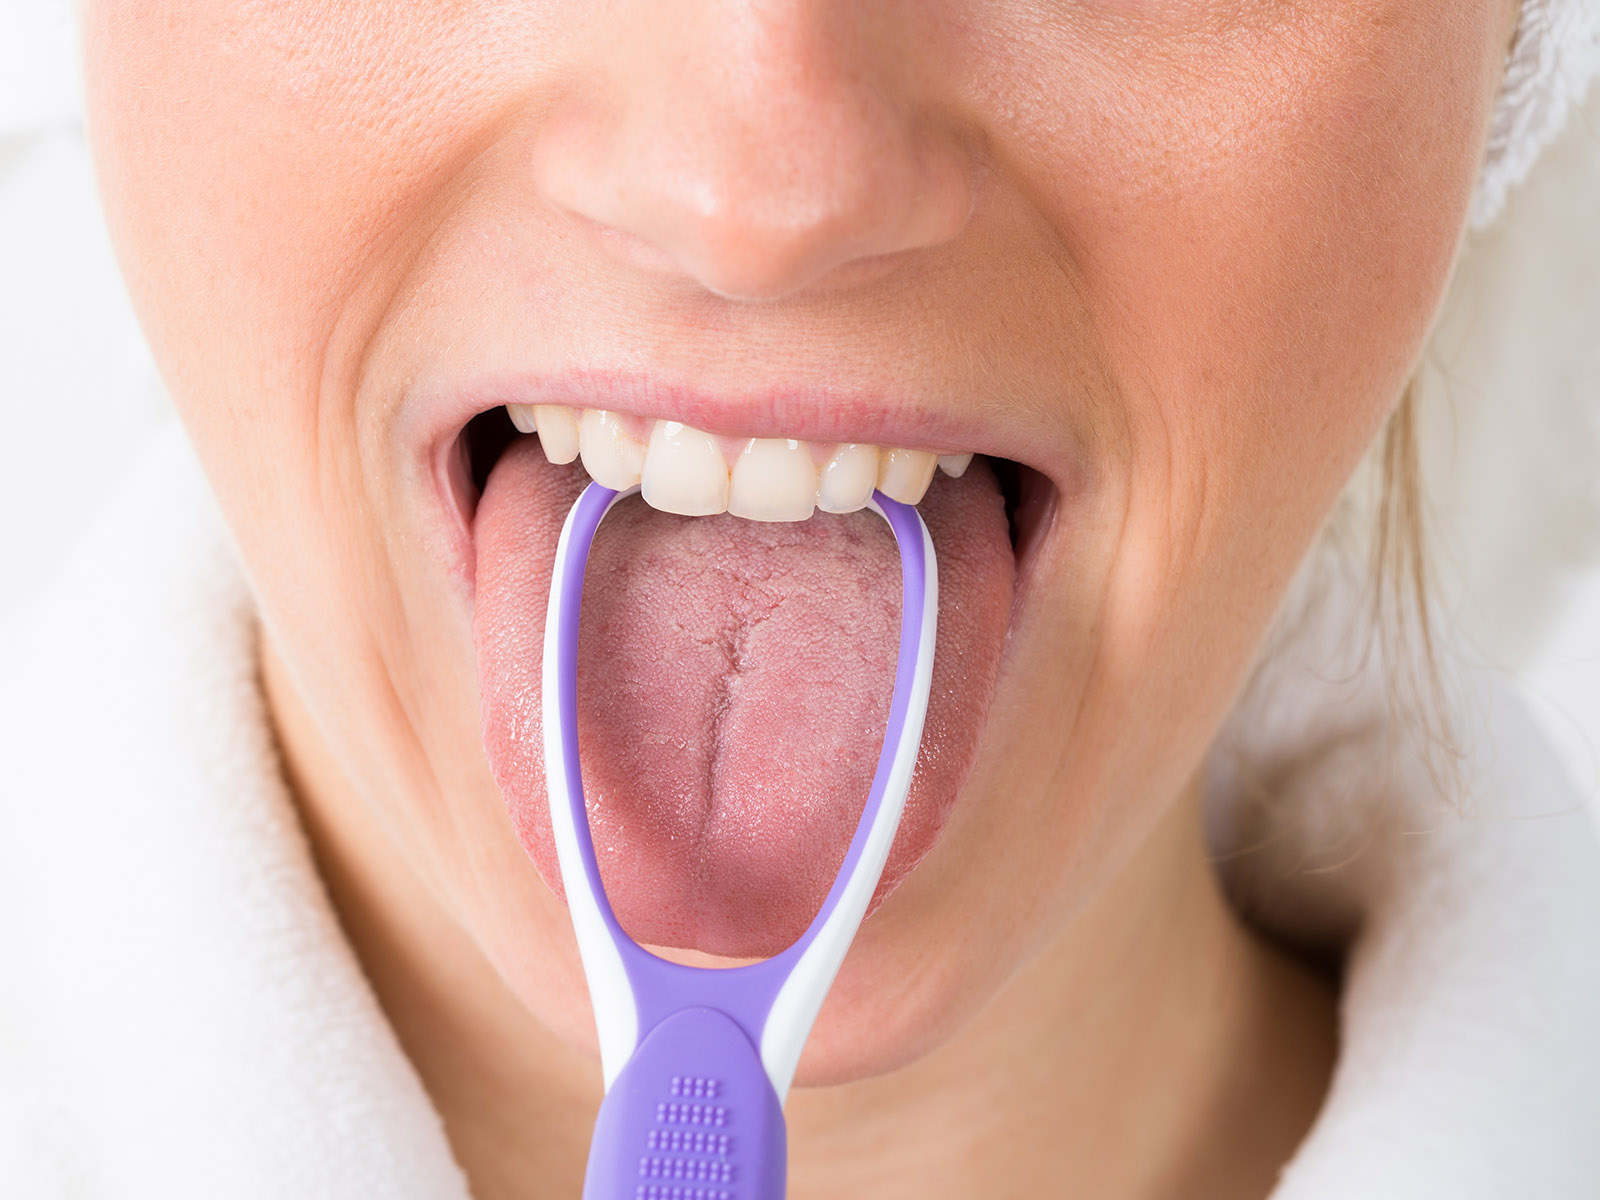 Which type of tongue cleaner is best?